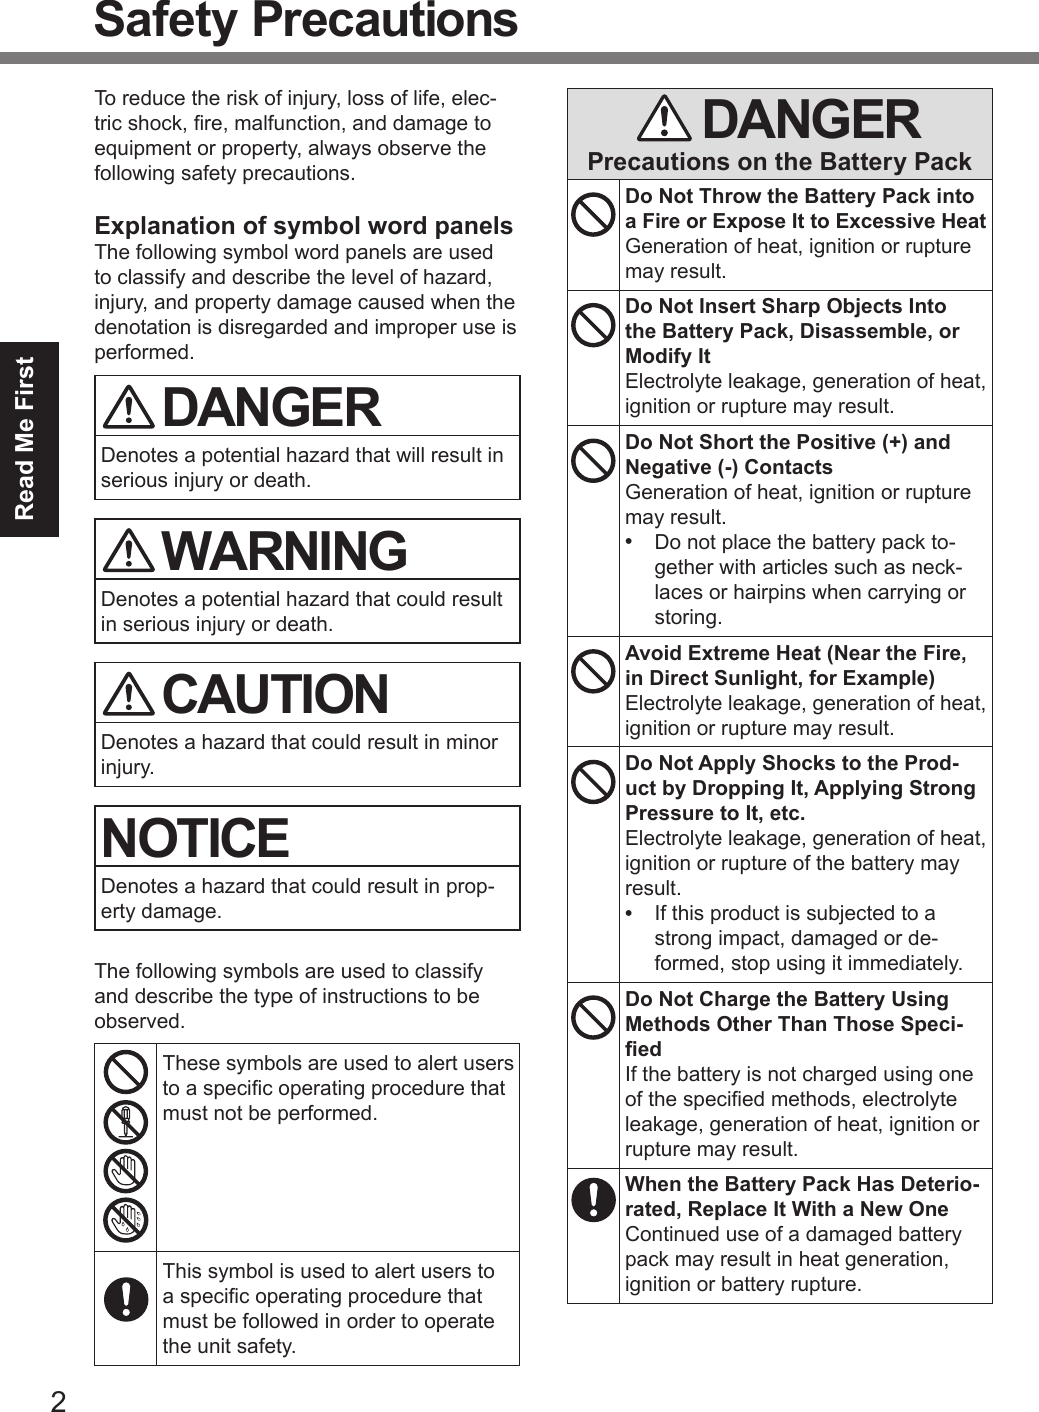 2Read Me FirstSafety PrecautionsTo reduce the risk of injury, loss of life, elec-tric shock, re, malfunction, and damage to equipment or property, always observe the following safety precautions.Explanation of symbol word panelsThe following symbol word panels are used to classify and describe the level of hazard, injury, and property damage caused when the denotation is disregarded and improper use is performed. DANGERDenotes a potential hazard that will result in serious injury or death. WARNINGDenotes a potential hazard that could result in serious injury or death. CAUTIONDenotes a hazard that could result in minor injury.NOTICEDenotes a hazard that could result in prop-erty damage.The following symbols are used to classify and describe the type of instructions to be observed.These symbols are used to alert users to a specic operating procedure that must not be performed.This symbol is used to alert users to a specic operating procedure that must be followed in order to operate the unit safety. DANGERPrecautions on the Battery PackDo Not Throw the Battery Pack into a Fire or Expose It to Excessive HeatGeneration of heat, ignition or rupture may result.Do Not Insert Sharp Objects Into the Battery Pack, Disassemble, or Modify ItElectrolyte leakage, generation of heat, ignition or rupture may result.Do Not Short the Positive (+) and Negative (-) ContactsGeneration of heat, ignition or rupture may result.•  Do not place the battery pack to-gether with articles such as neck-laces or hairpins when carrying or storing.Avoid Extreme Heat (Near the Fire, in Direct Sunlight, for Example)Electrolyte leakage, generation of heat, ignition or rupture may result.Do Not Apply Shocks to the Prod-uct by Dropping It, Applying Strong Pressure to It, etc.Electrolyte leakage, generation of heat, ignition or rupture of the battery may result.•  If this product is subjected to a strong impact, damaged or de-formed, stop using it immediately.Do Not Charge the Battery Using Methods Other Than Those Speci-edIf the battery is not charged using one of the specied methods, electrolyte leakage, generation of heat, ignition or rupture may result.When the Battery Pack Has Deterio-rated, Replace It With a New OneContinued use of a damaged battery pack may result in heat generation, ignition or battery rupture.DFQW5716ZAT_FZ-G1mk1_8_7_OI_M.indb   2 2013/01/11   13:34:56